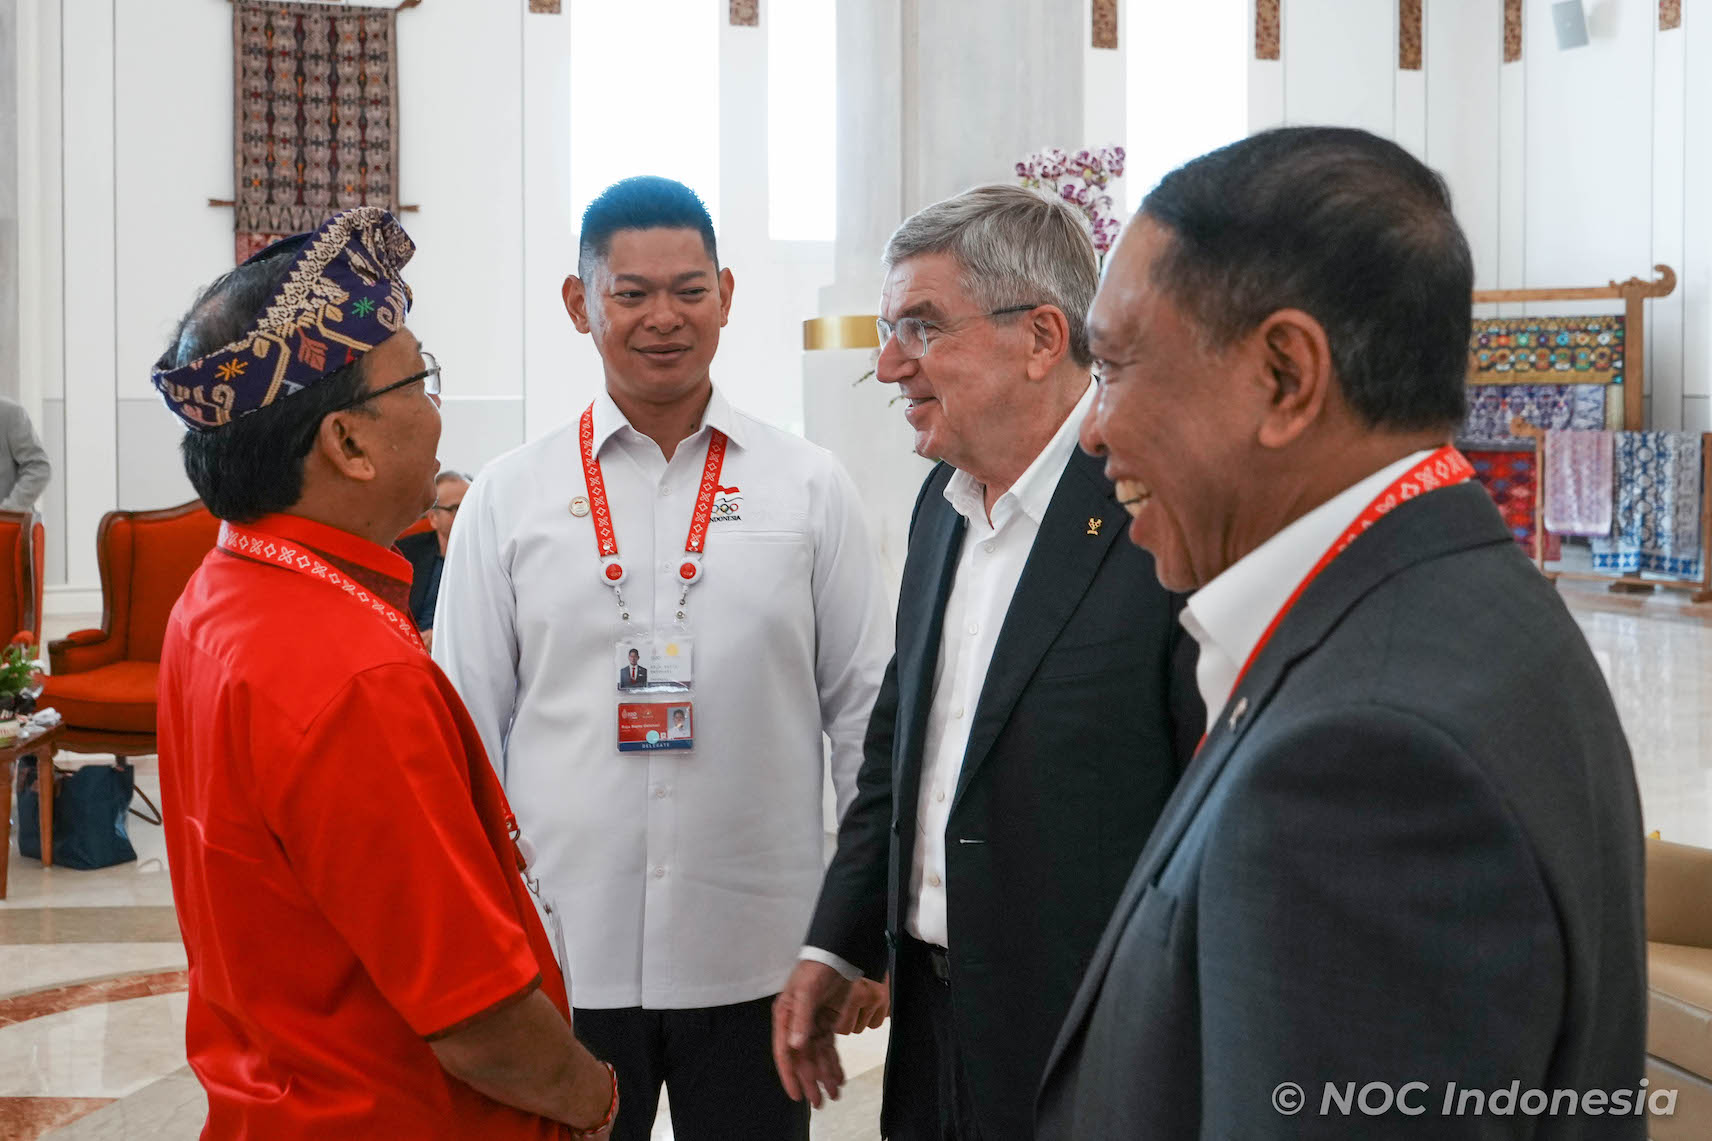 Minister of Sports, and President of NOC Indonesia welcome Thomas Bach's arrival in Bali - Indonesia Olympic Commitee